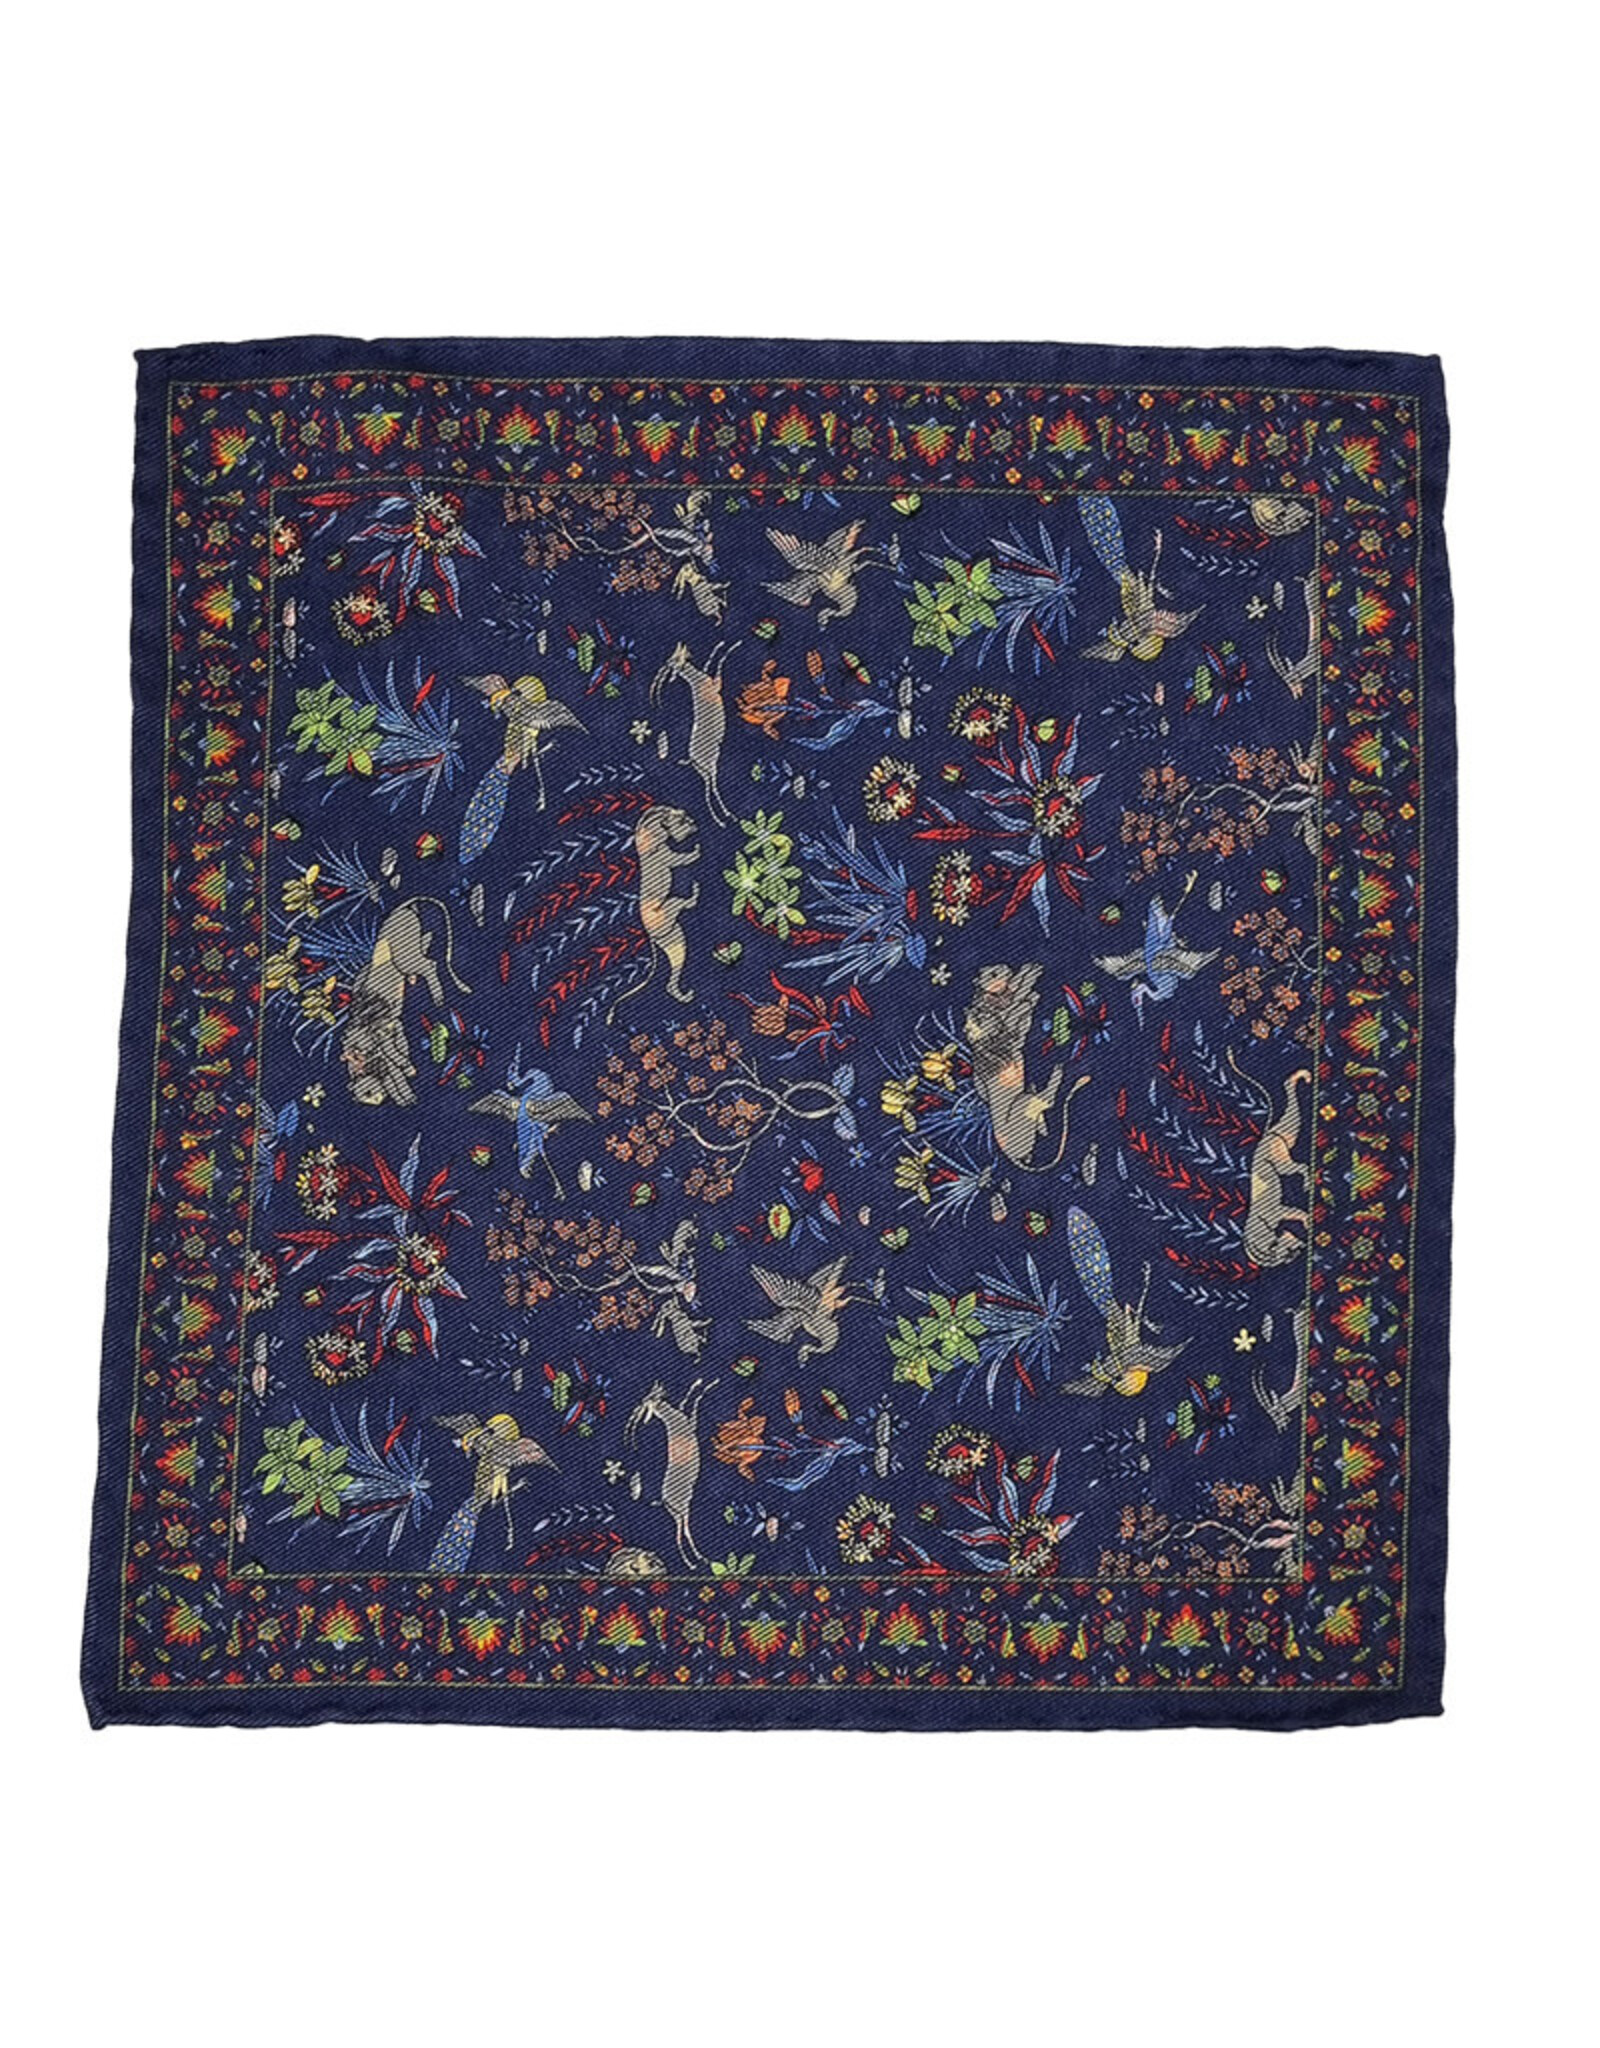 Calabrese Calabrese pocket square forest blue 8024018/001